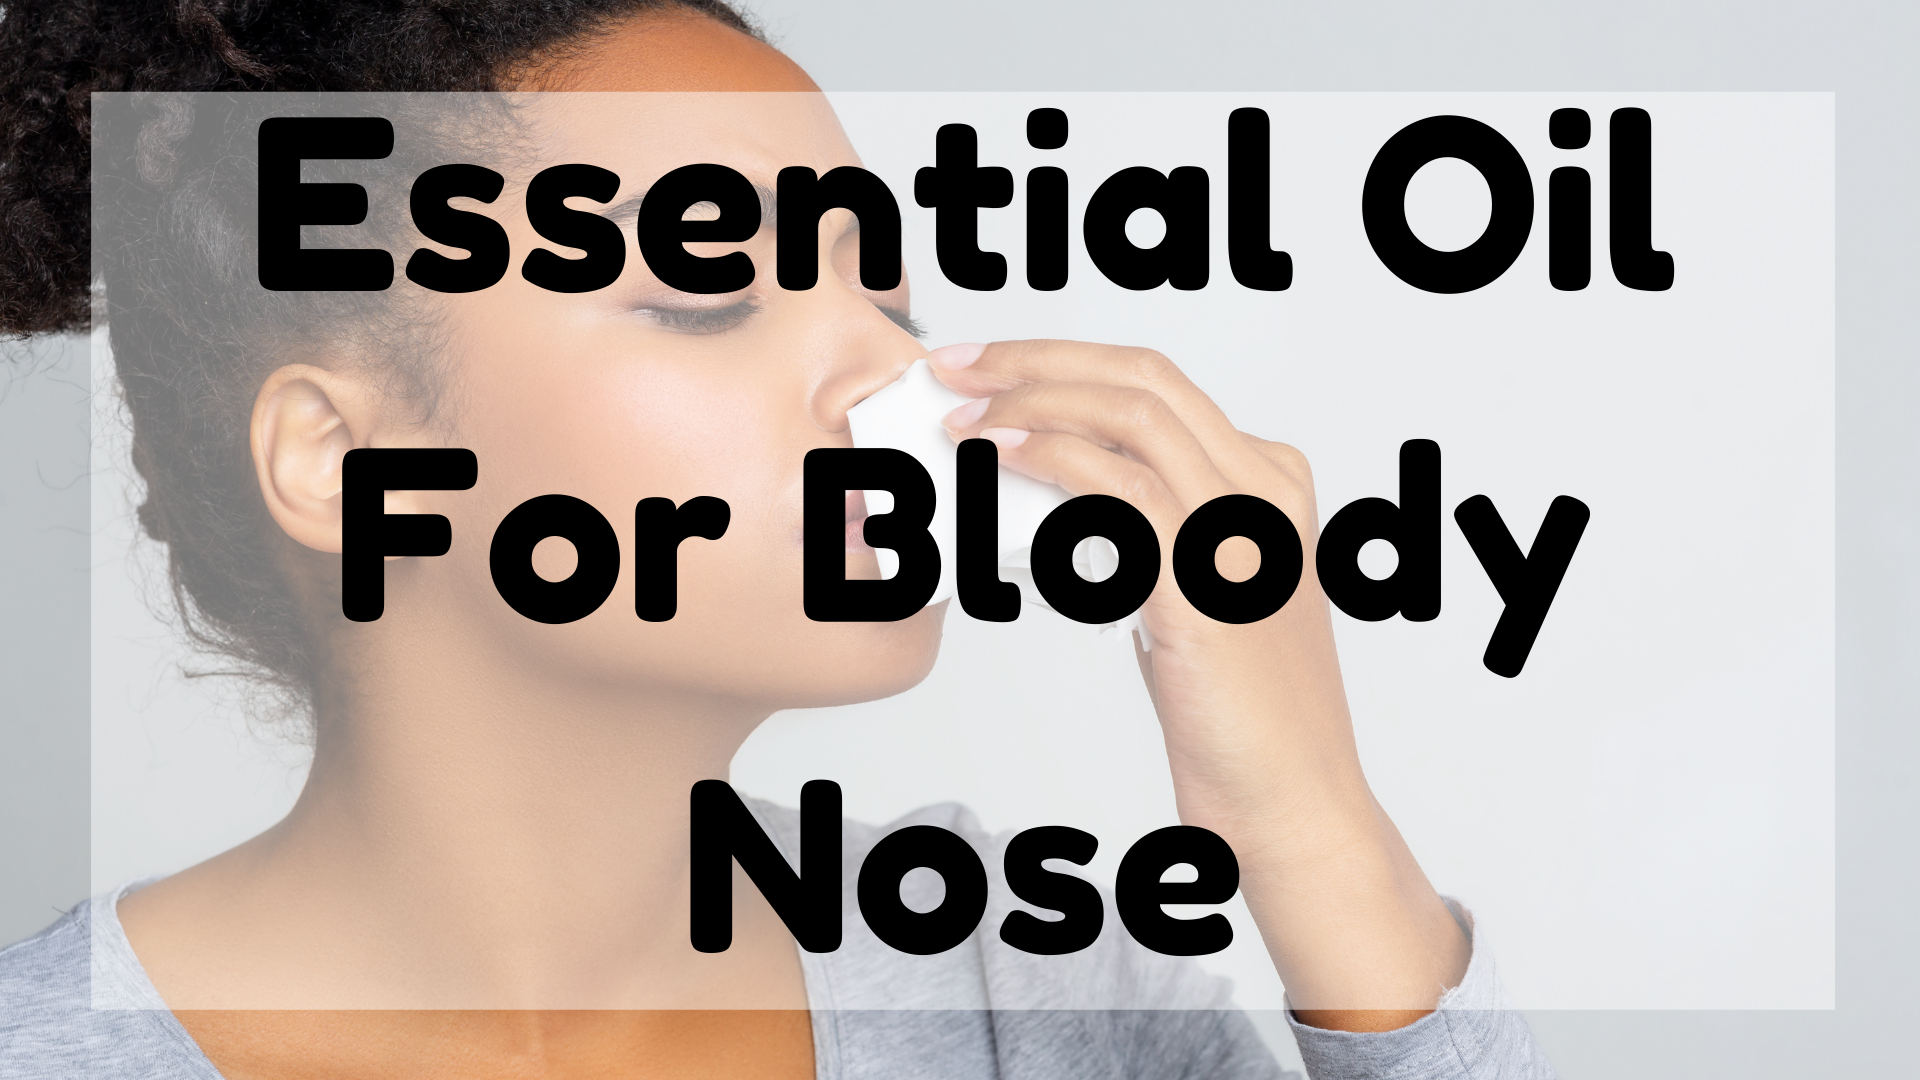 Essential Oil For Bloody Nose